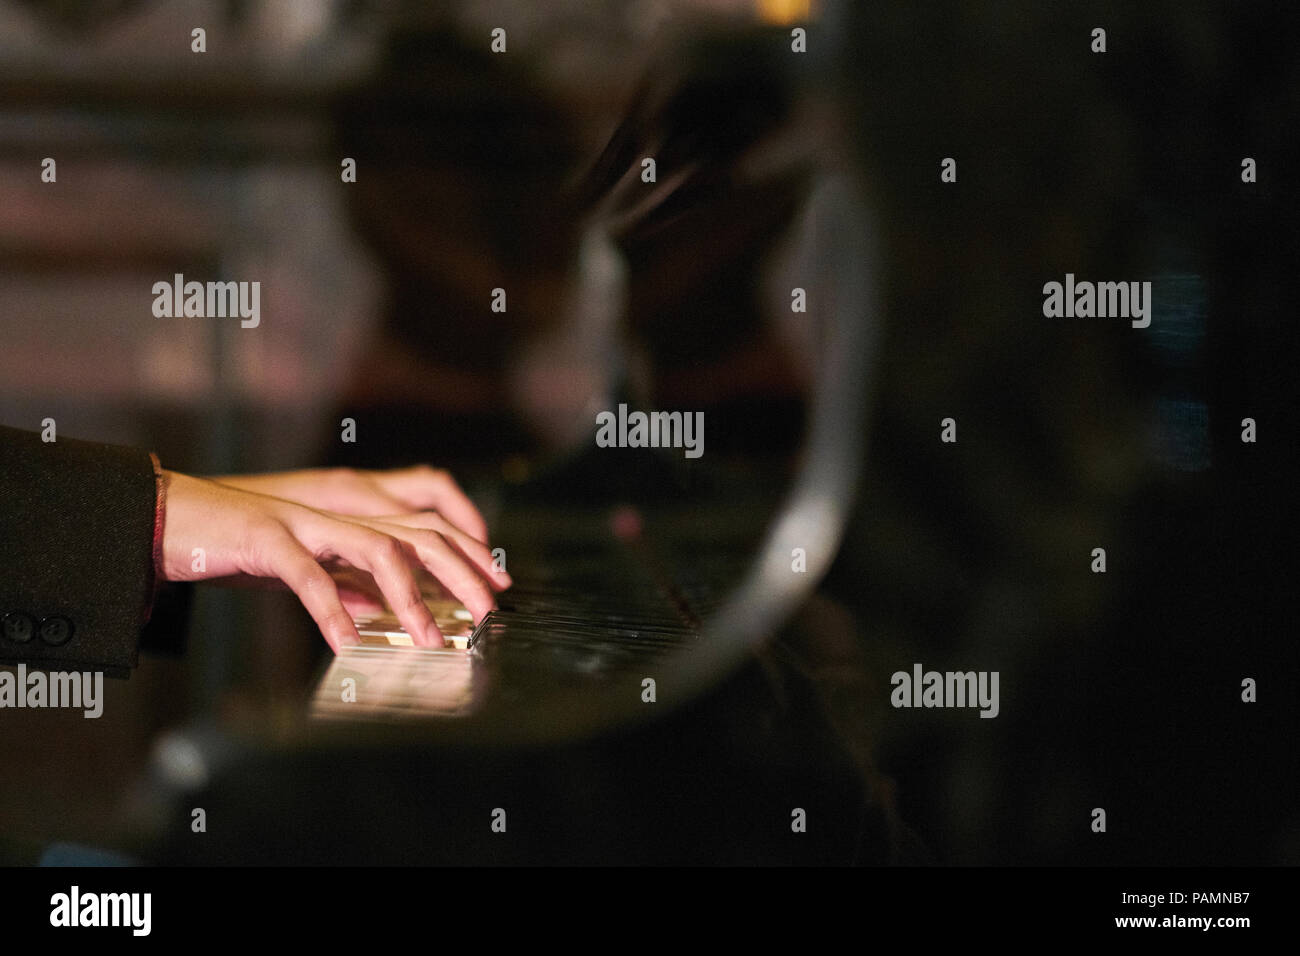 Pianist's hands playing a grand piano Stock Photo